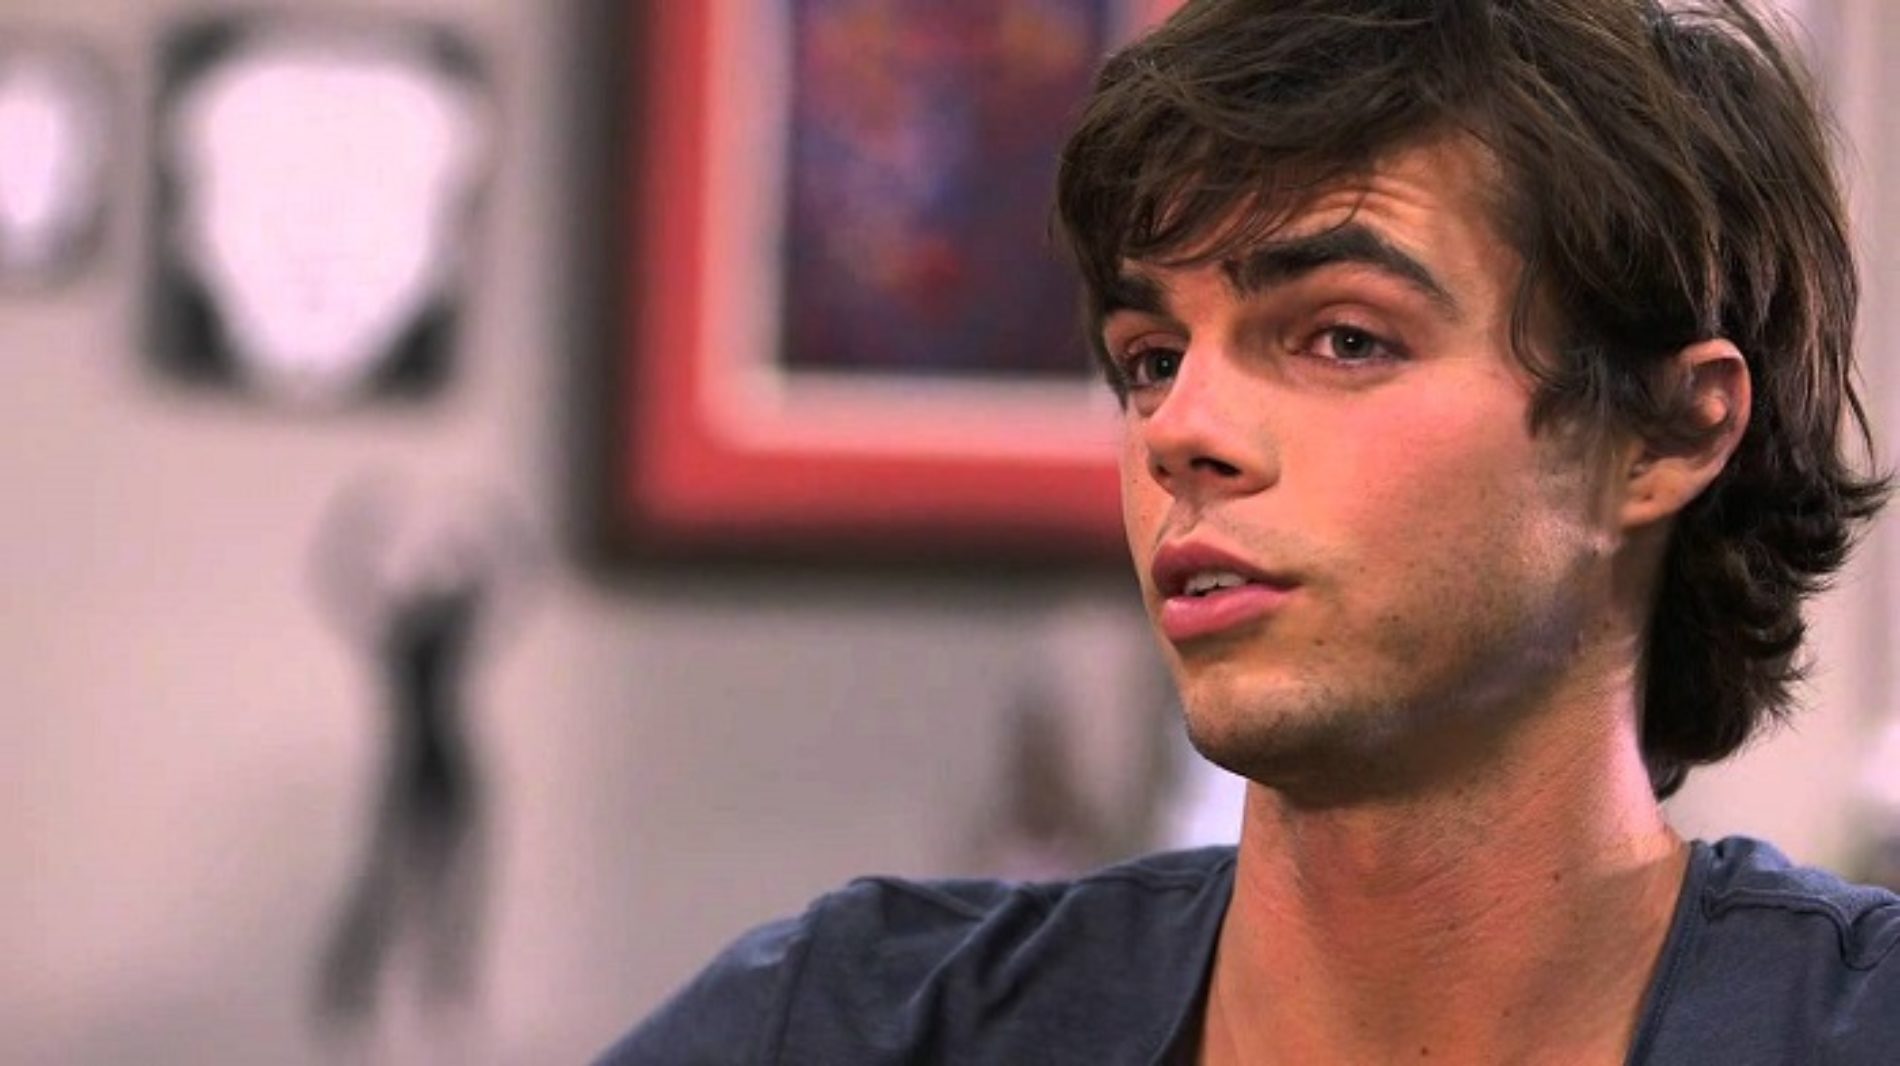 ‘Modern Family’ Actor Reid Ewing Comes Out On Twitter, Reveals Long Struggle With Body Dysmorphia